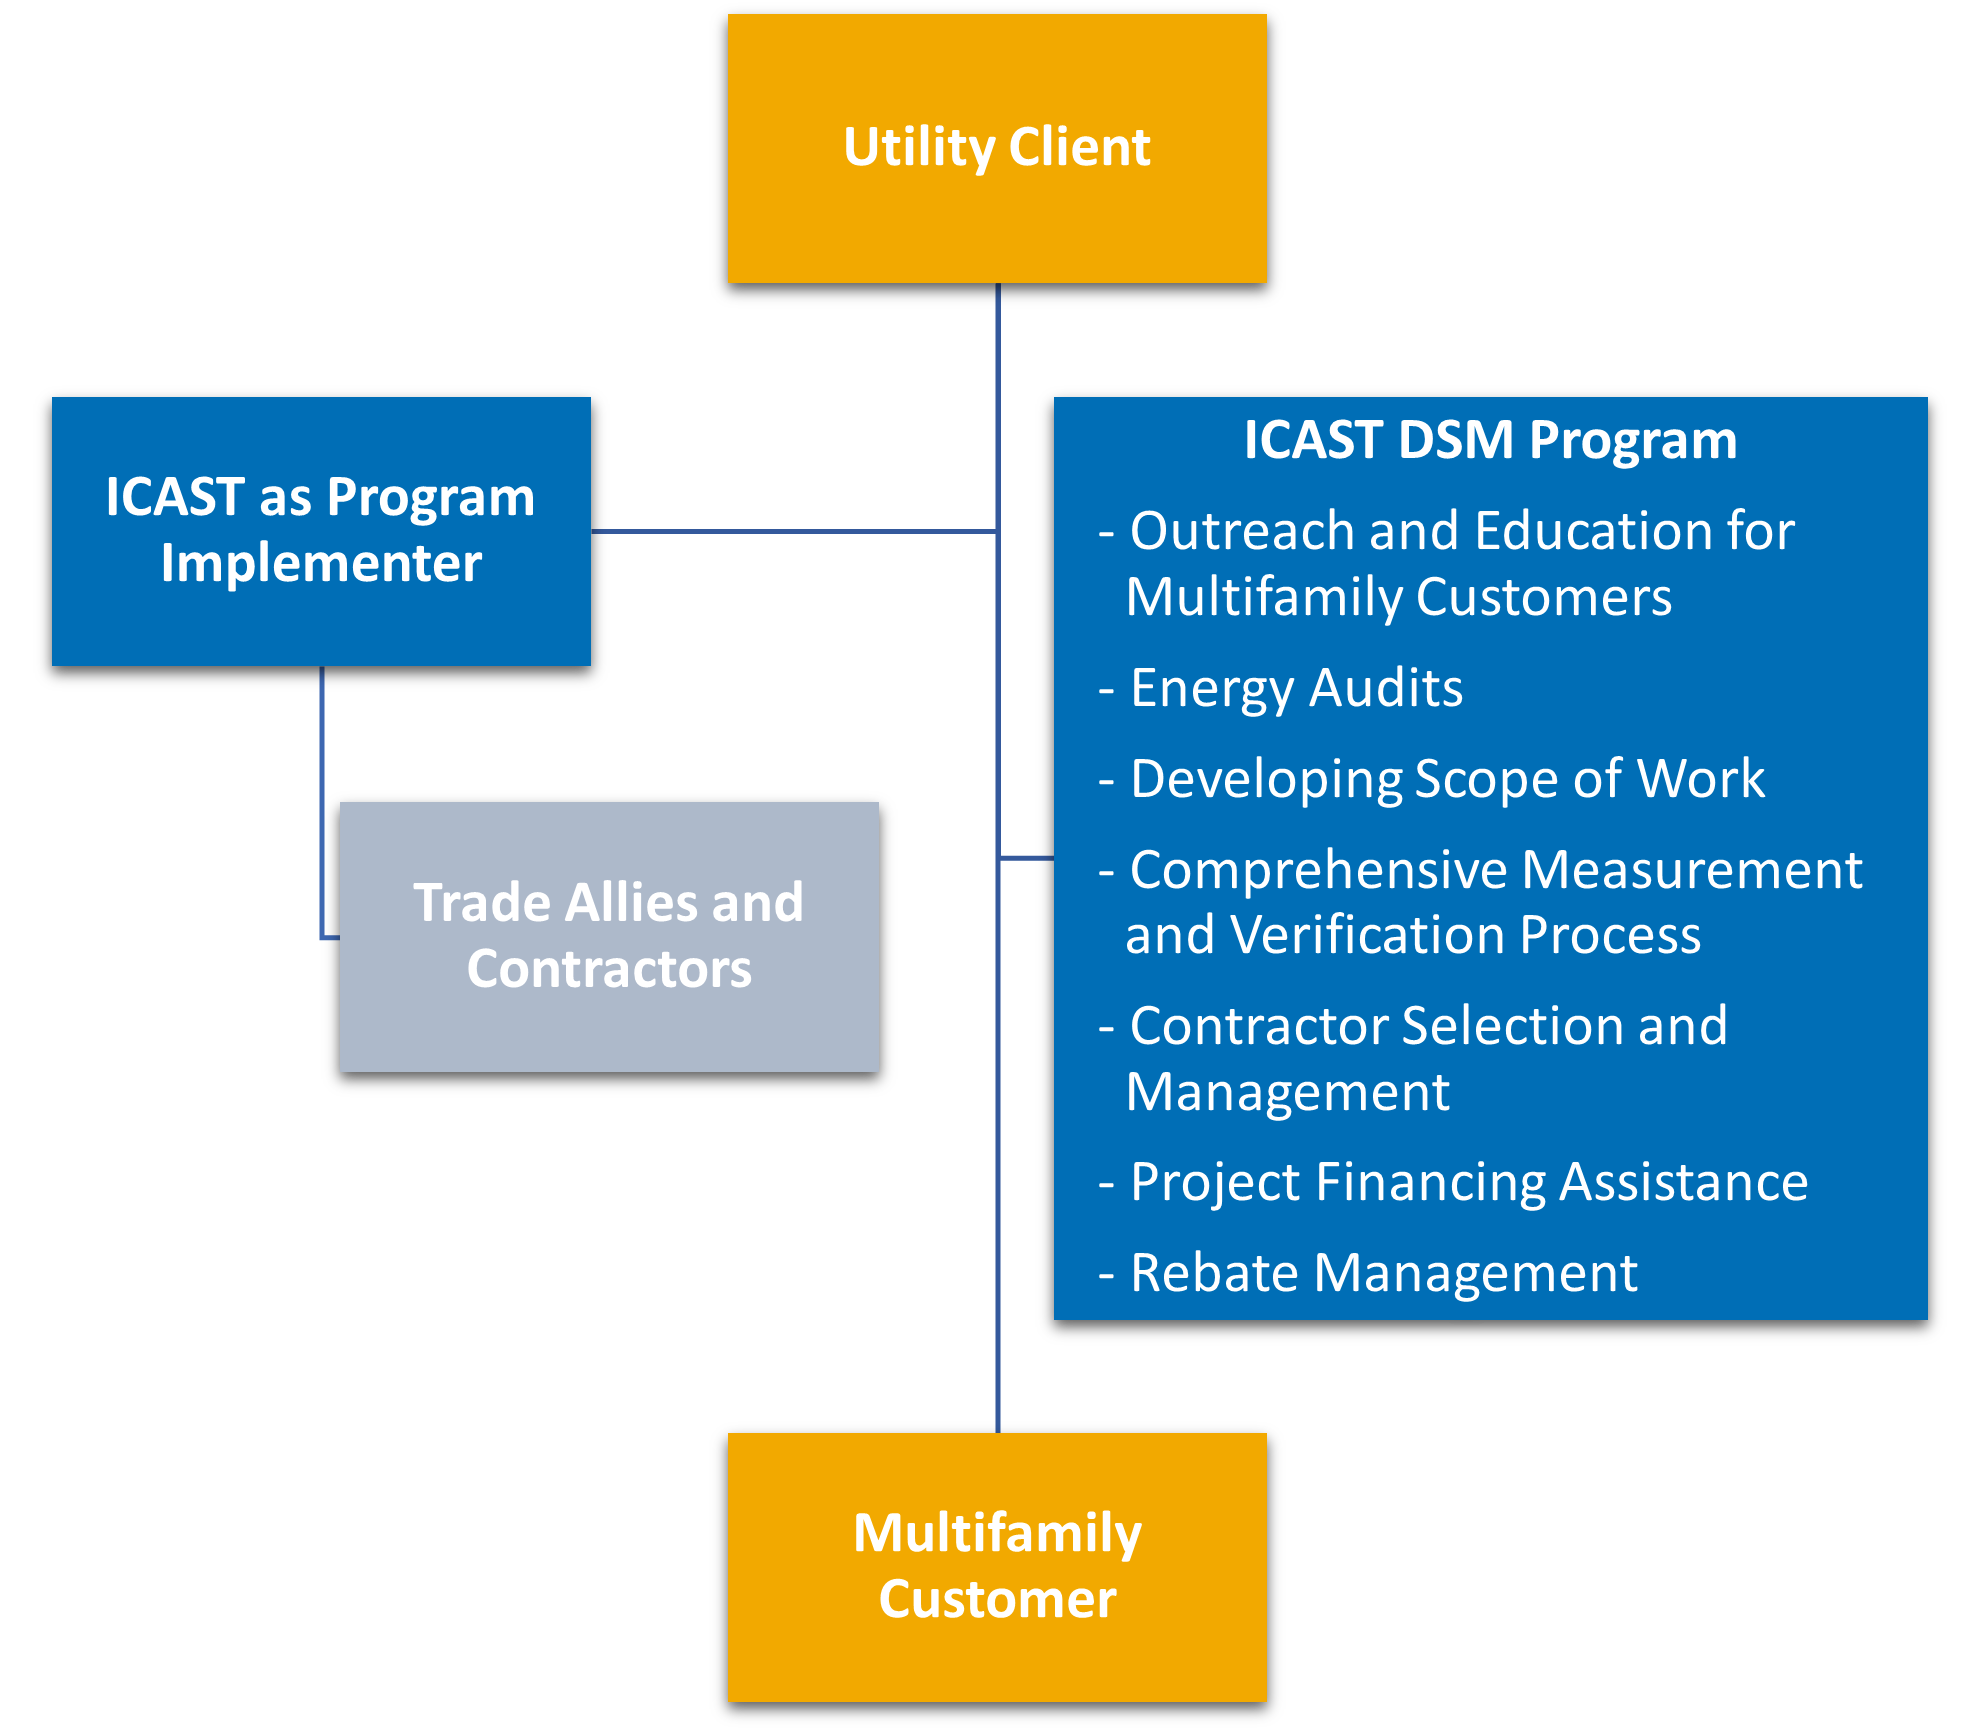 ICAST DSM Model Trade Allies / Contractors  Utility • Energy Savings • Customized Program • Rebate Admin  Multifamily Customers  ICAST DSM Program   Market to MF owners Energy Audits Develop Scope for Deep EE Retrofits M&V Contractor Selection/Management Assist with Project Financing Rebate Management